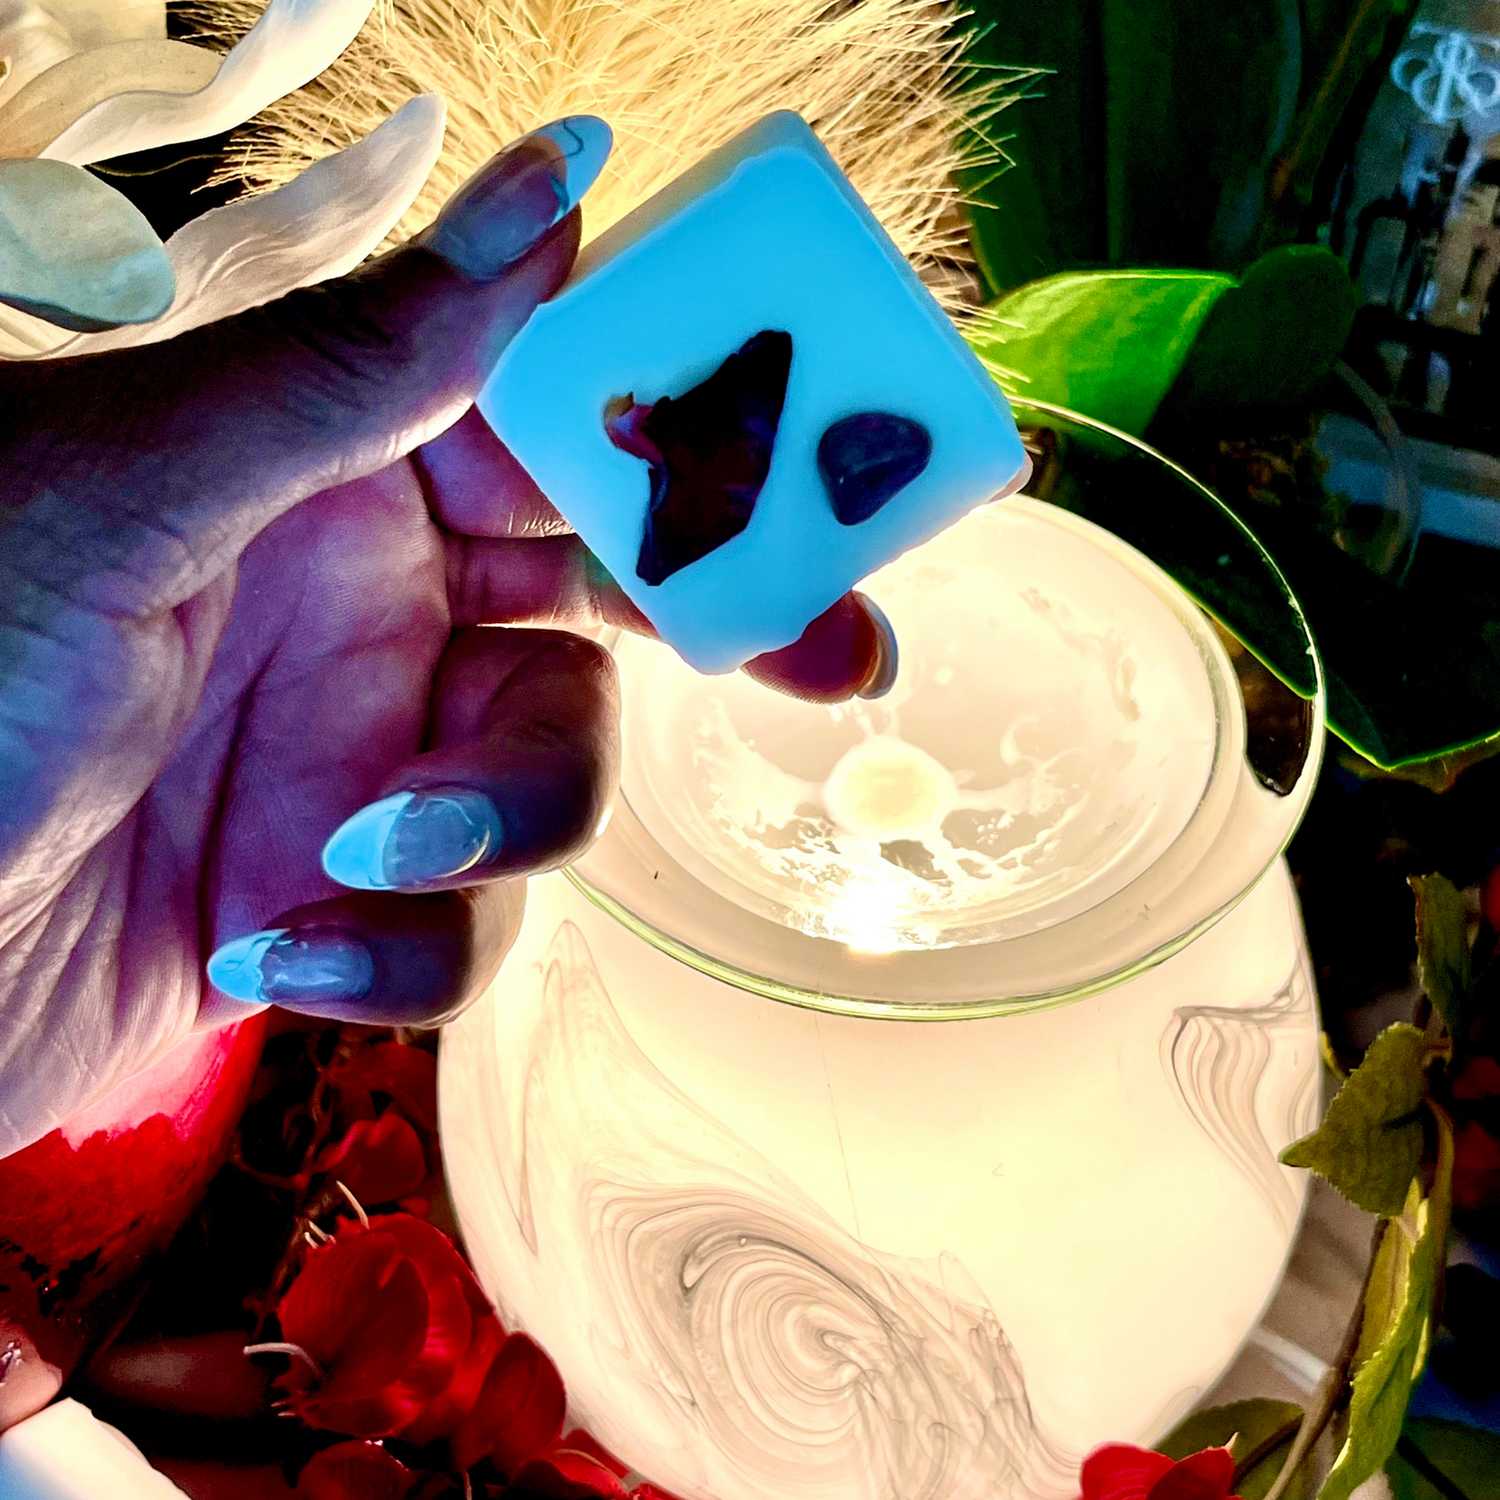 Alchemy7 | Aphrodite - Wax Melts - The Allure of Romance in Each Cube